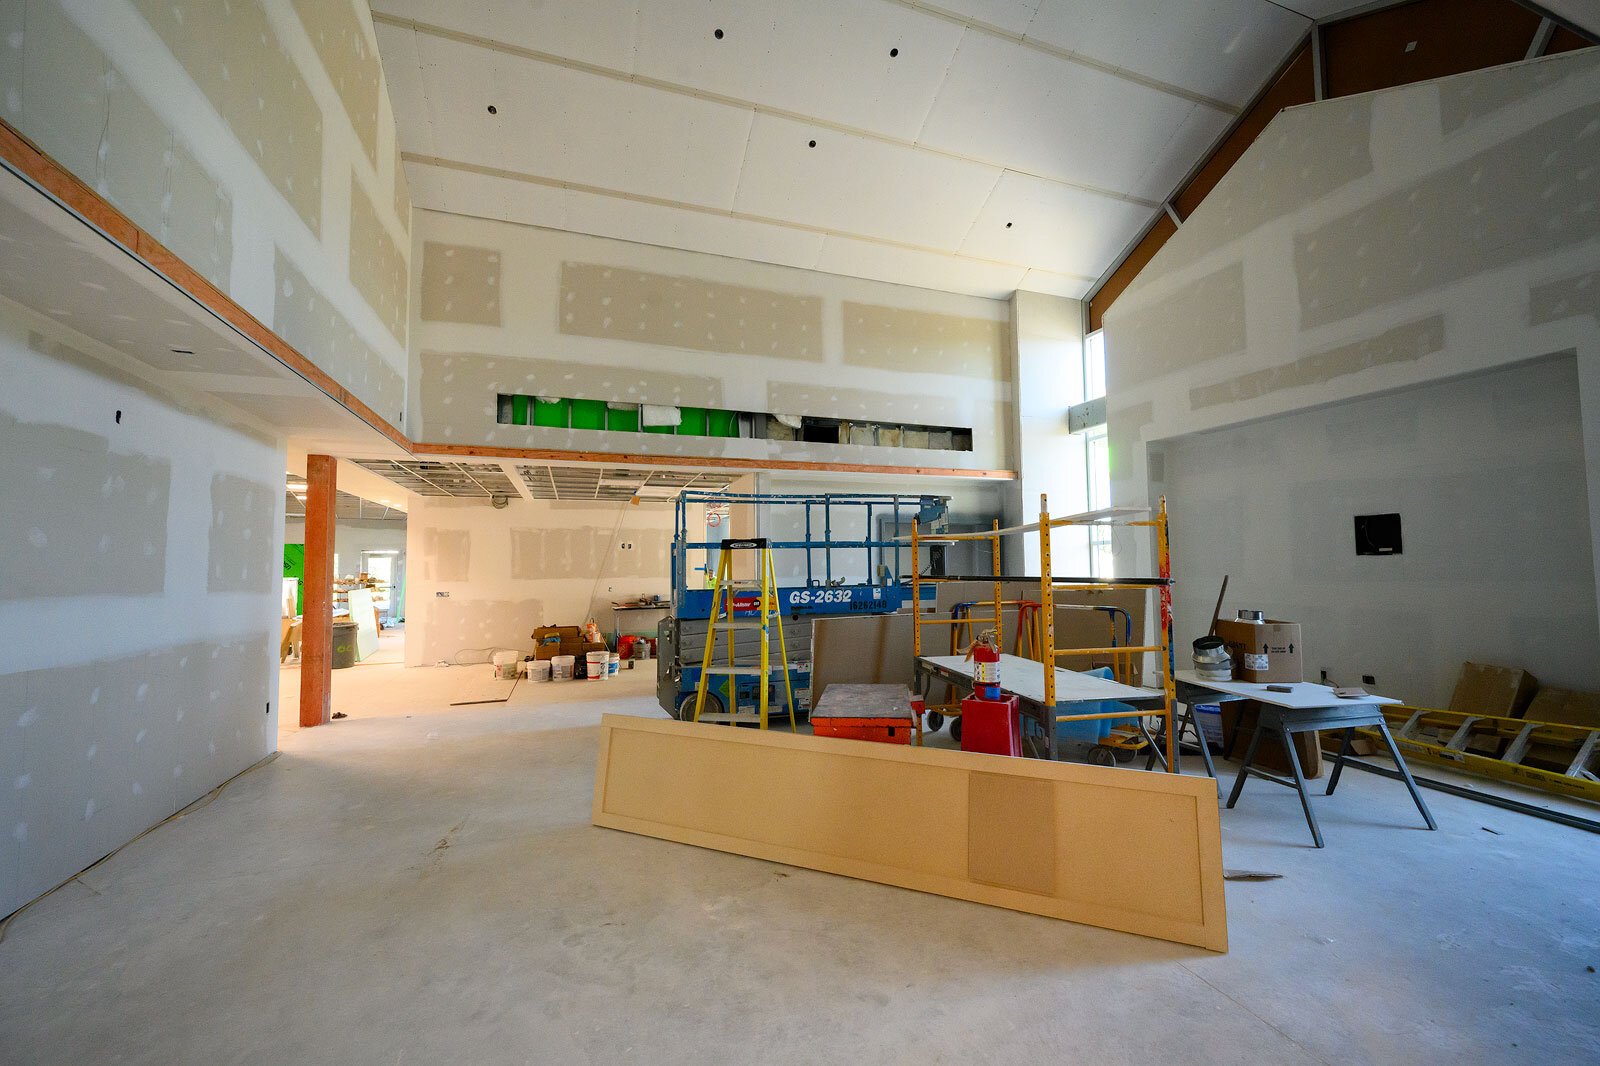 The Ypsilanti District Library's new branch in Superior Township under construction.